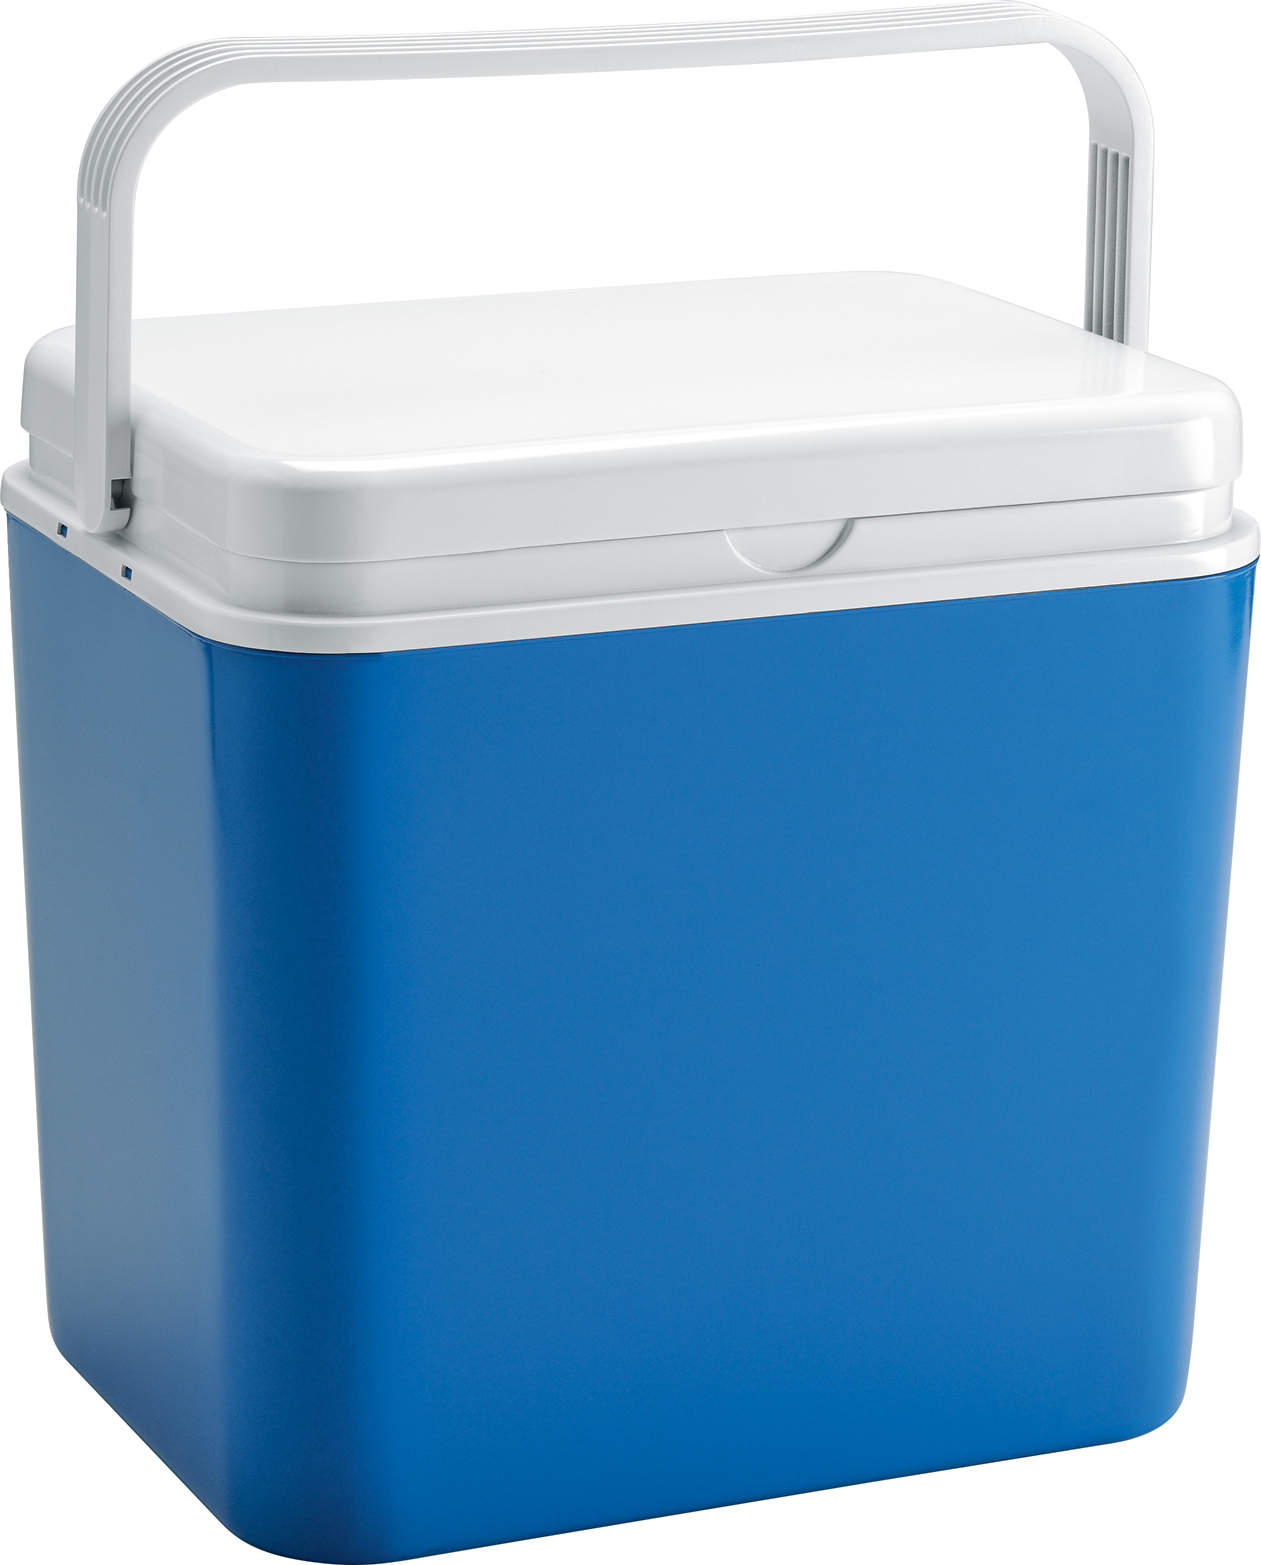 COOL BOX 30LTR BLUE WITH WHITE HANDLE